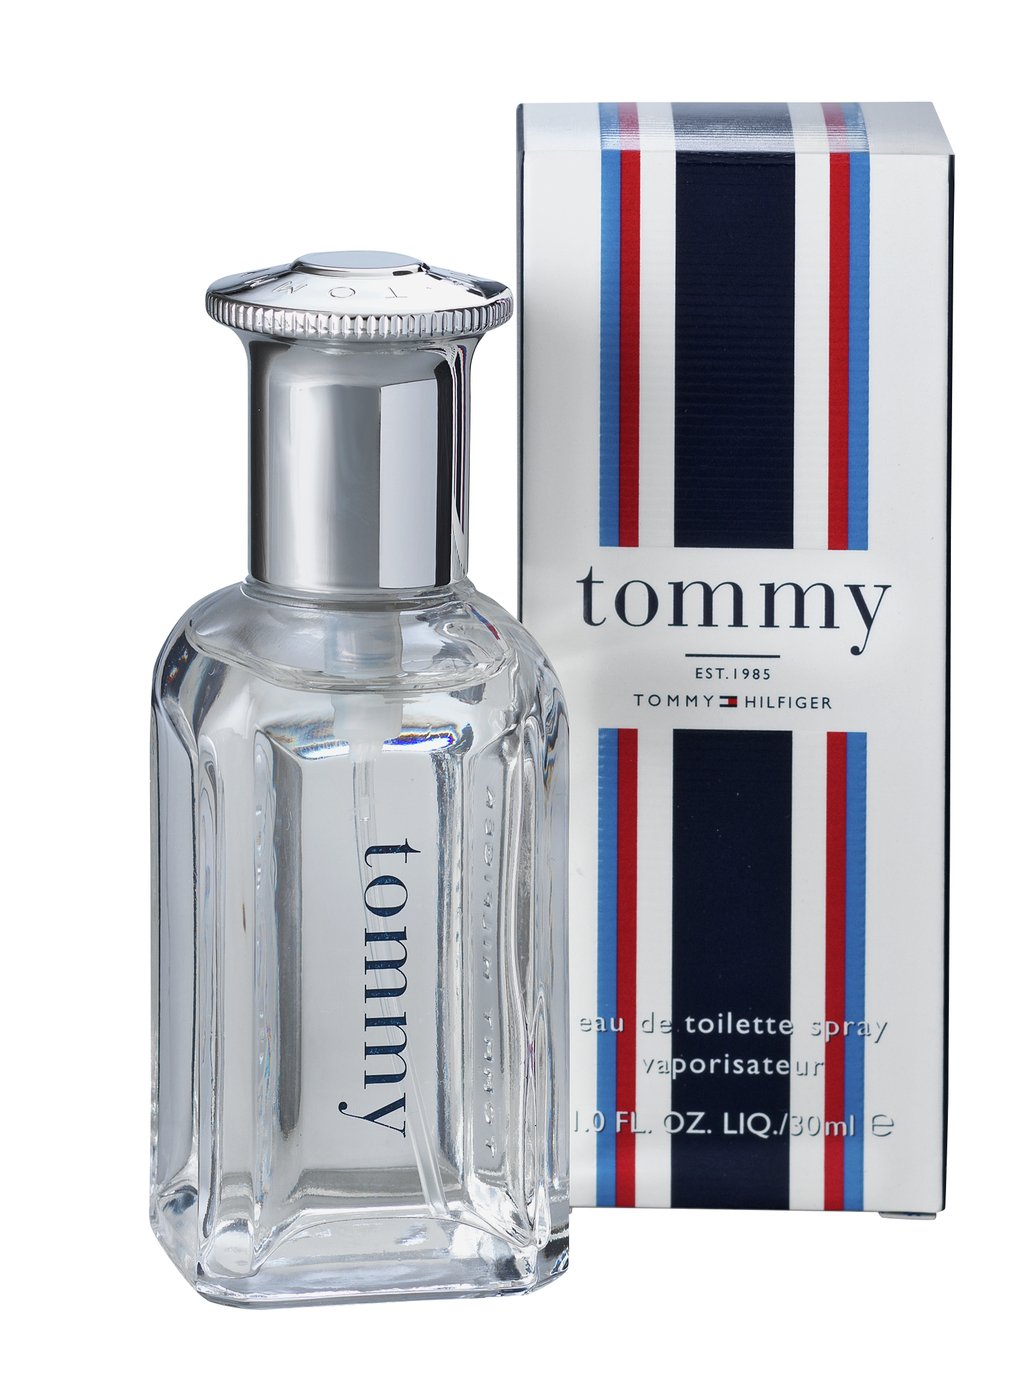 Results for tommy hilfiger